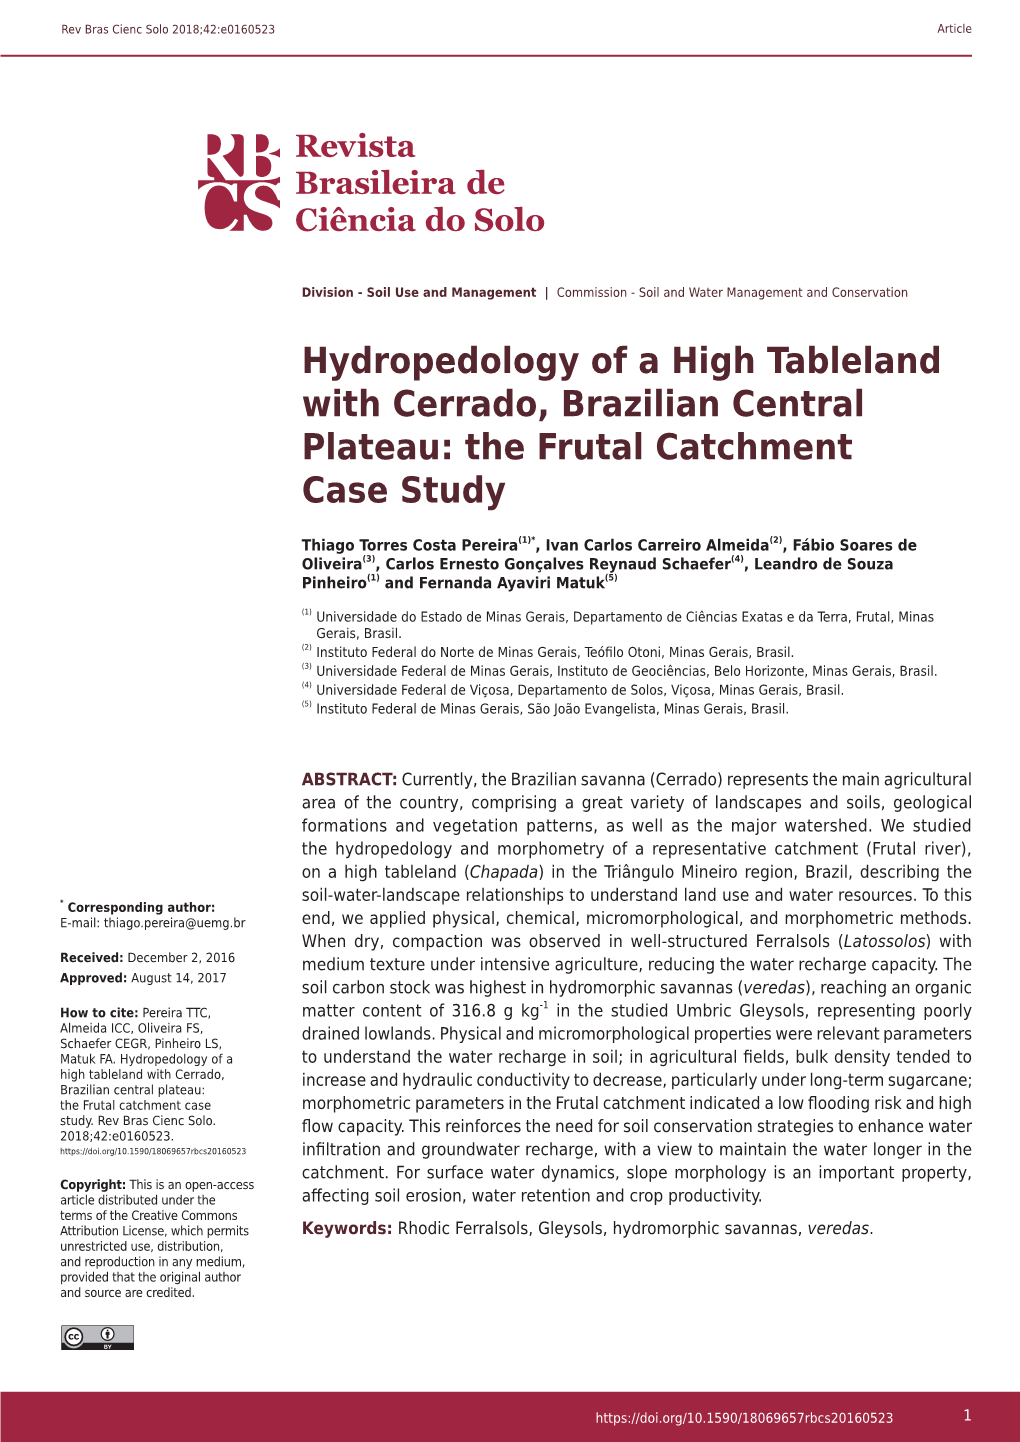 Hydropedology of a High Tableland with Cerrado, Brazilian Central Plateau: the Frutal Catchment Case Study